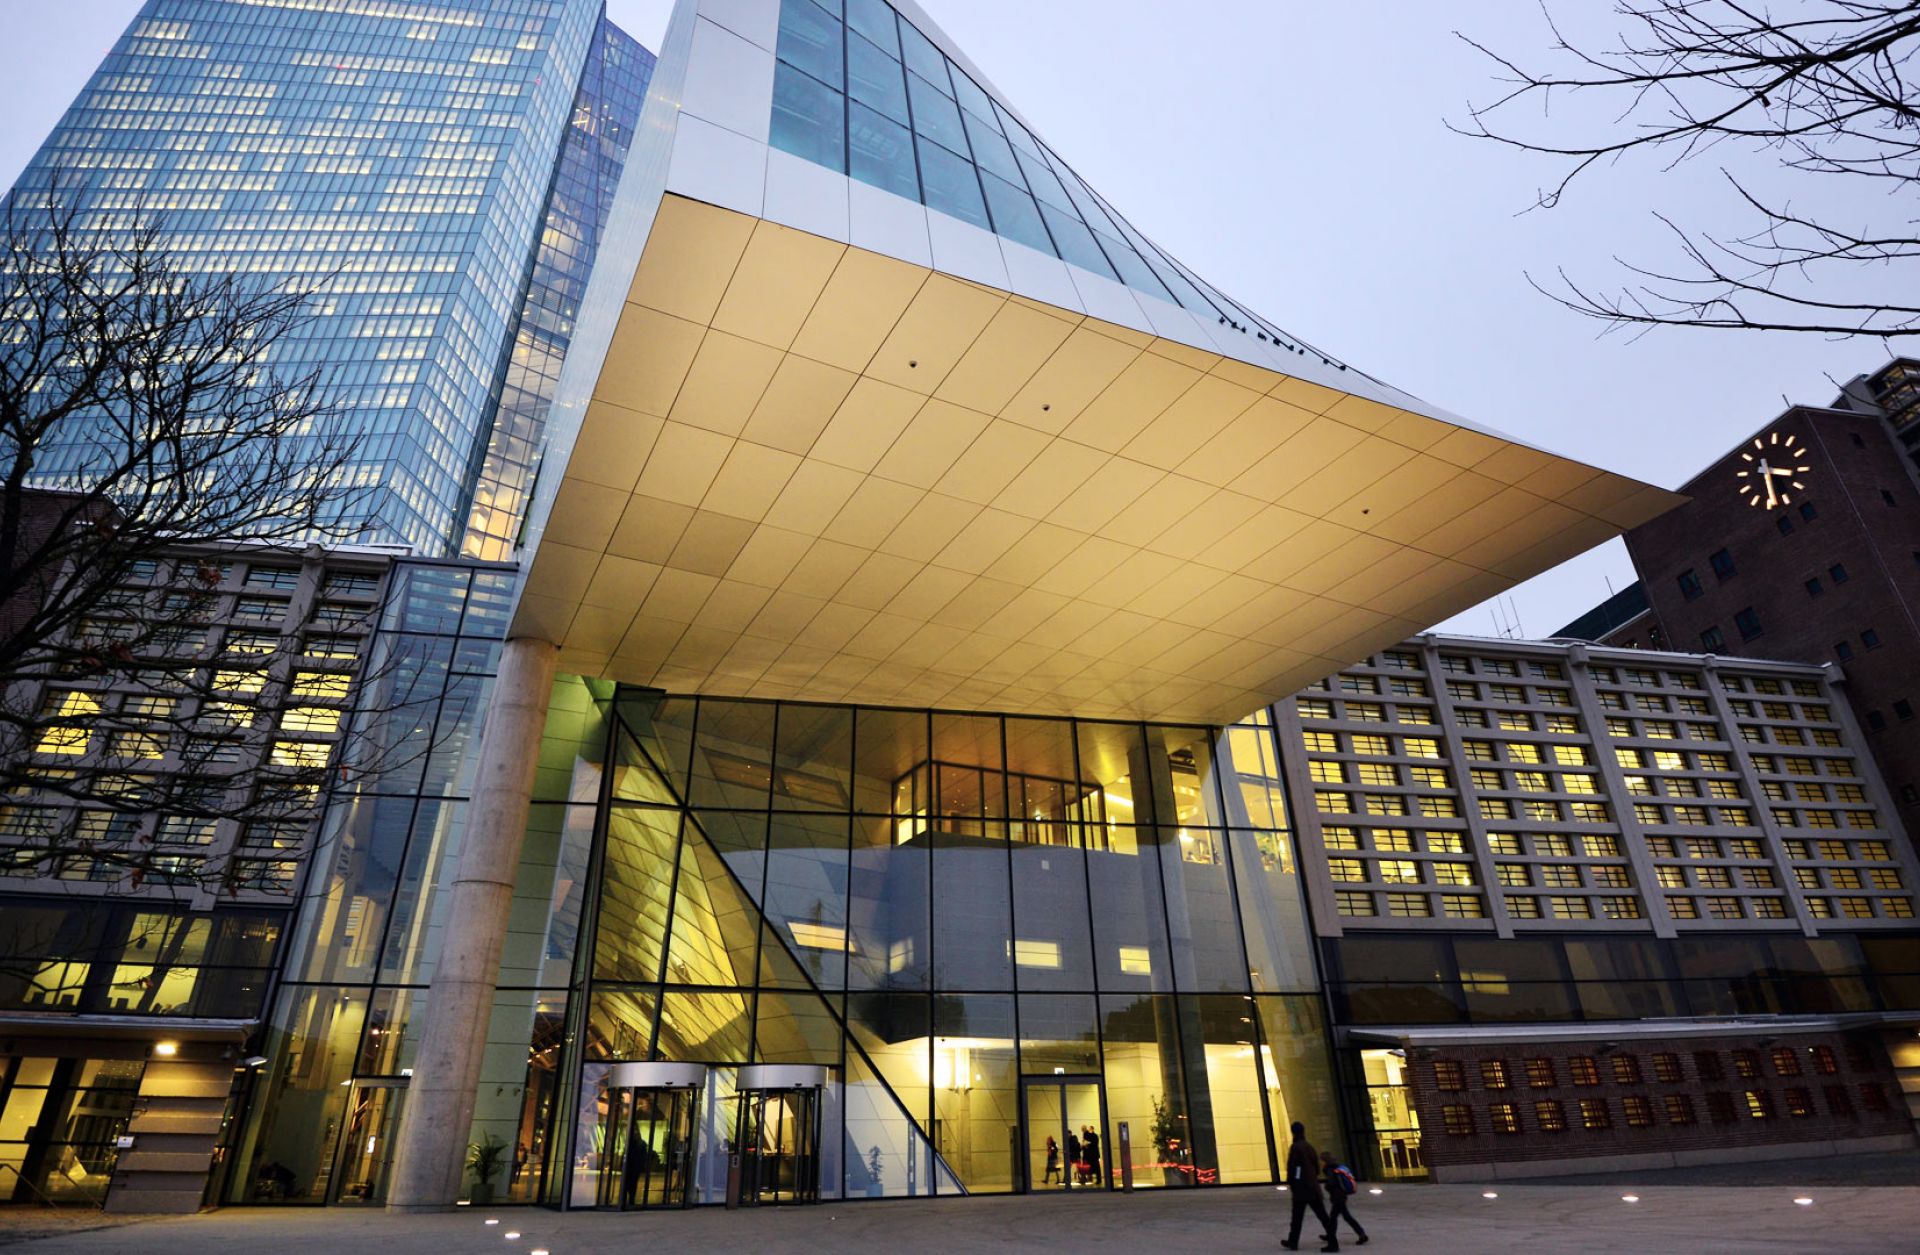 At the headquarters of the European Central Bank in Frankfurt, the bank's officials are mulling changes to its bond-buying regimen, which supports its quantitative easing program.